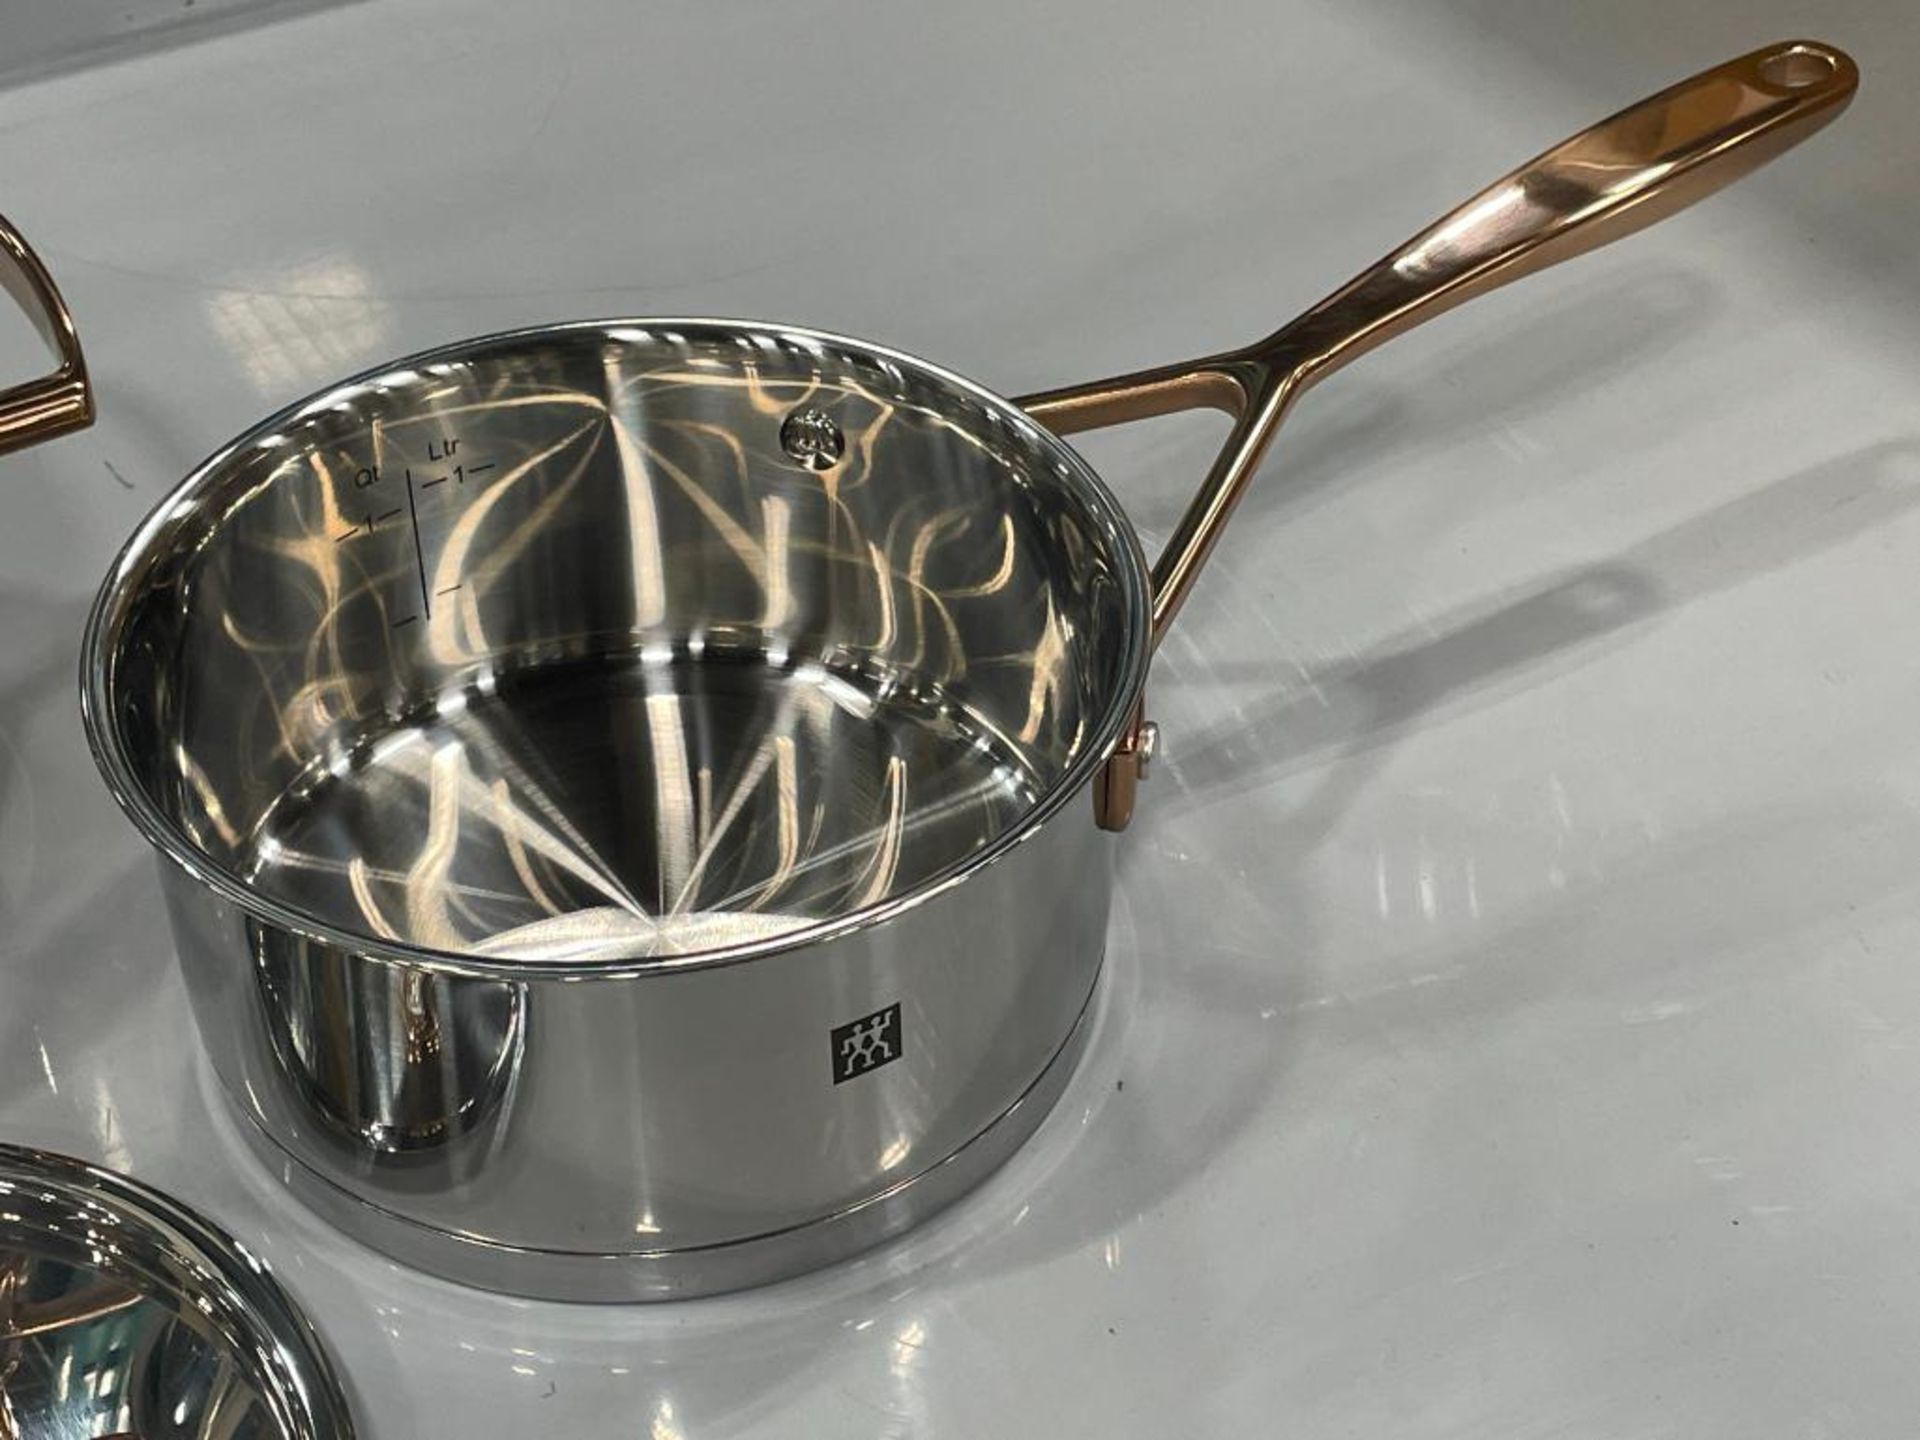 NEW ZWILLING 18/10 STAINLESS STEEL INDUCTION CAPABLE 2L STOCK POT & 1.5L SAUCE PAN - Image 7 of 12